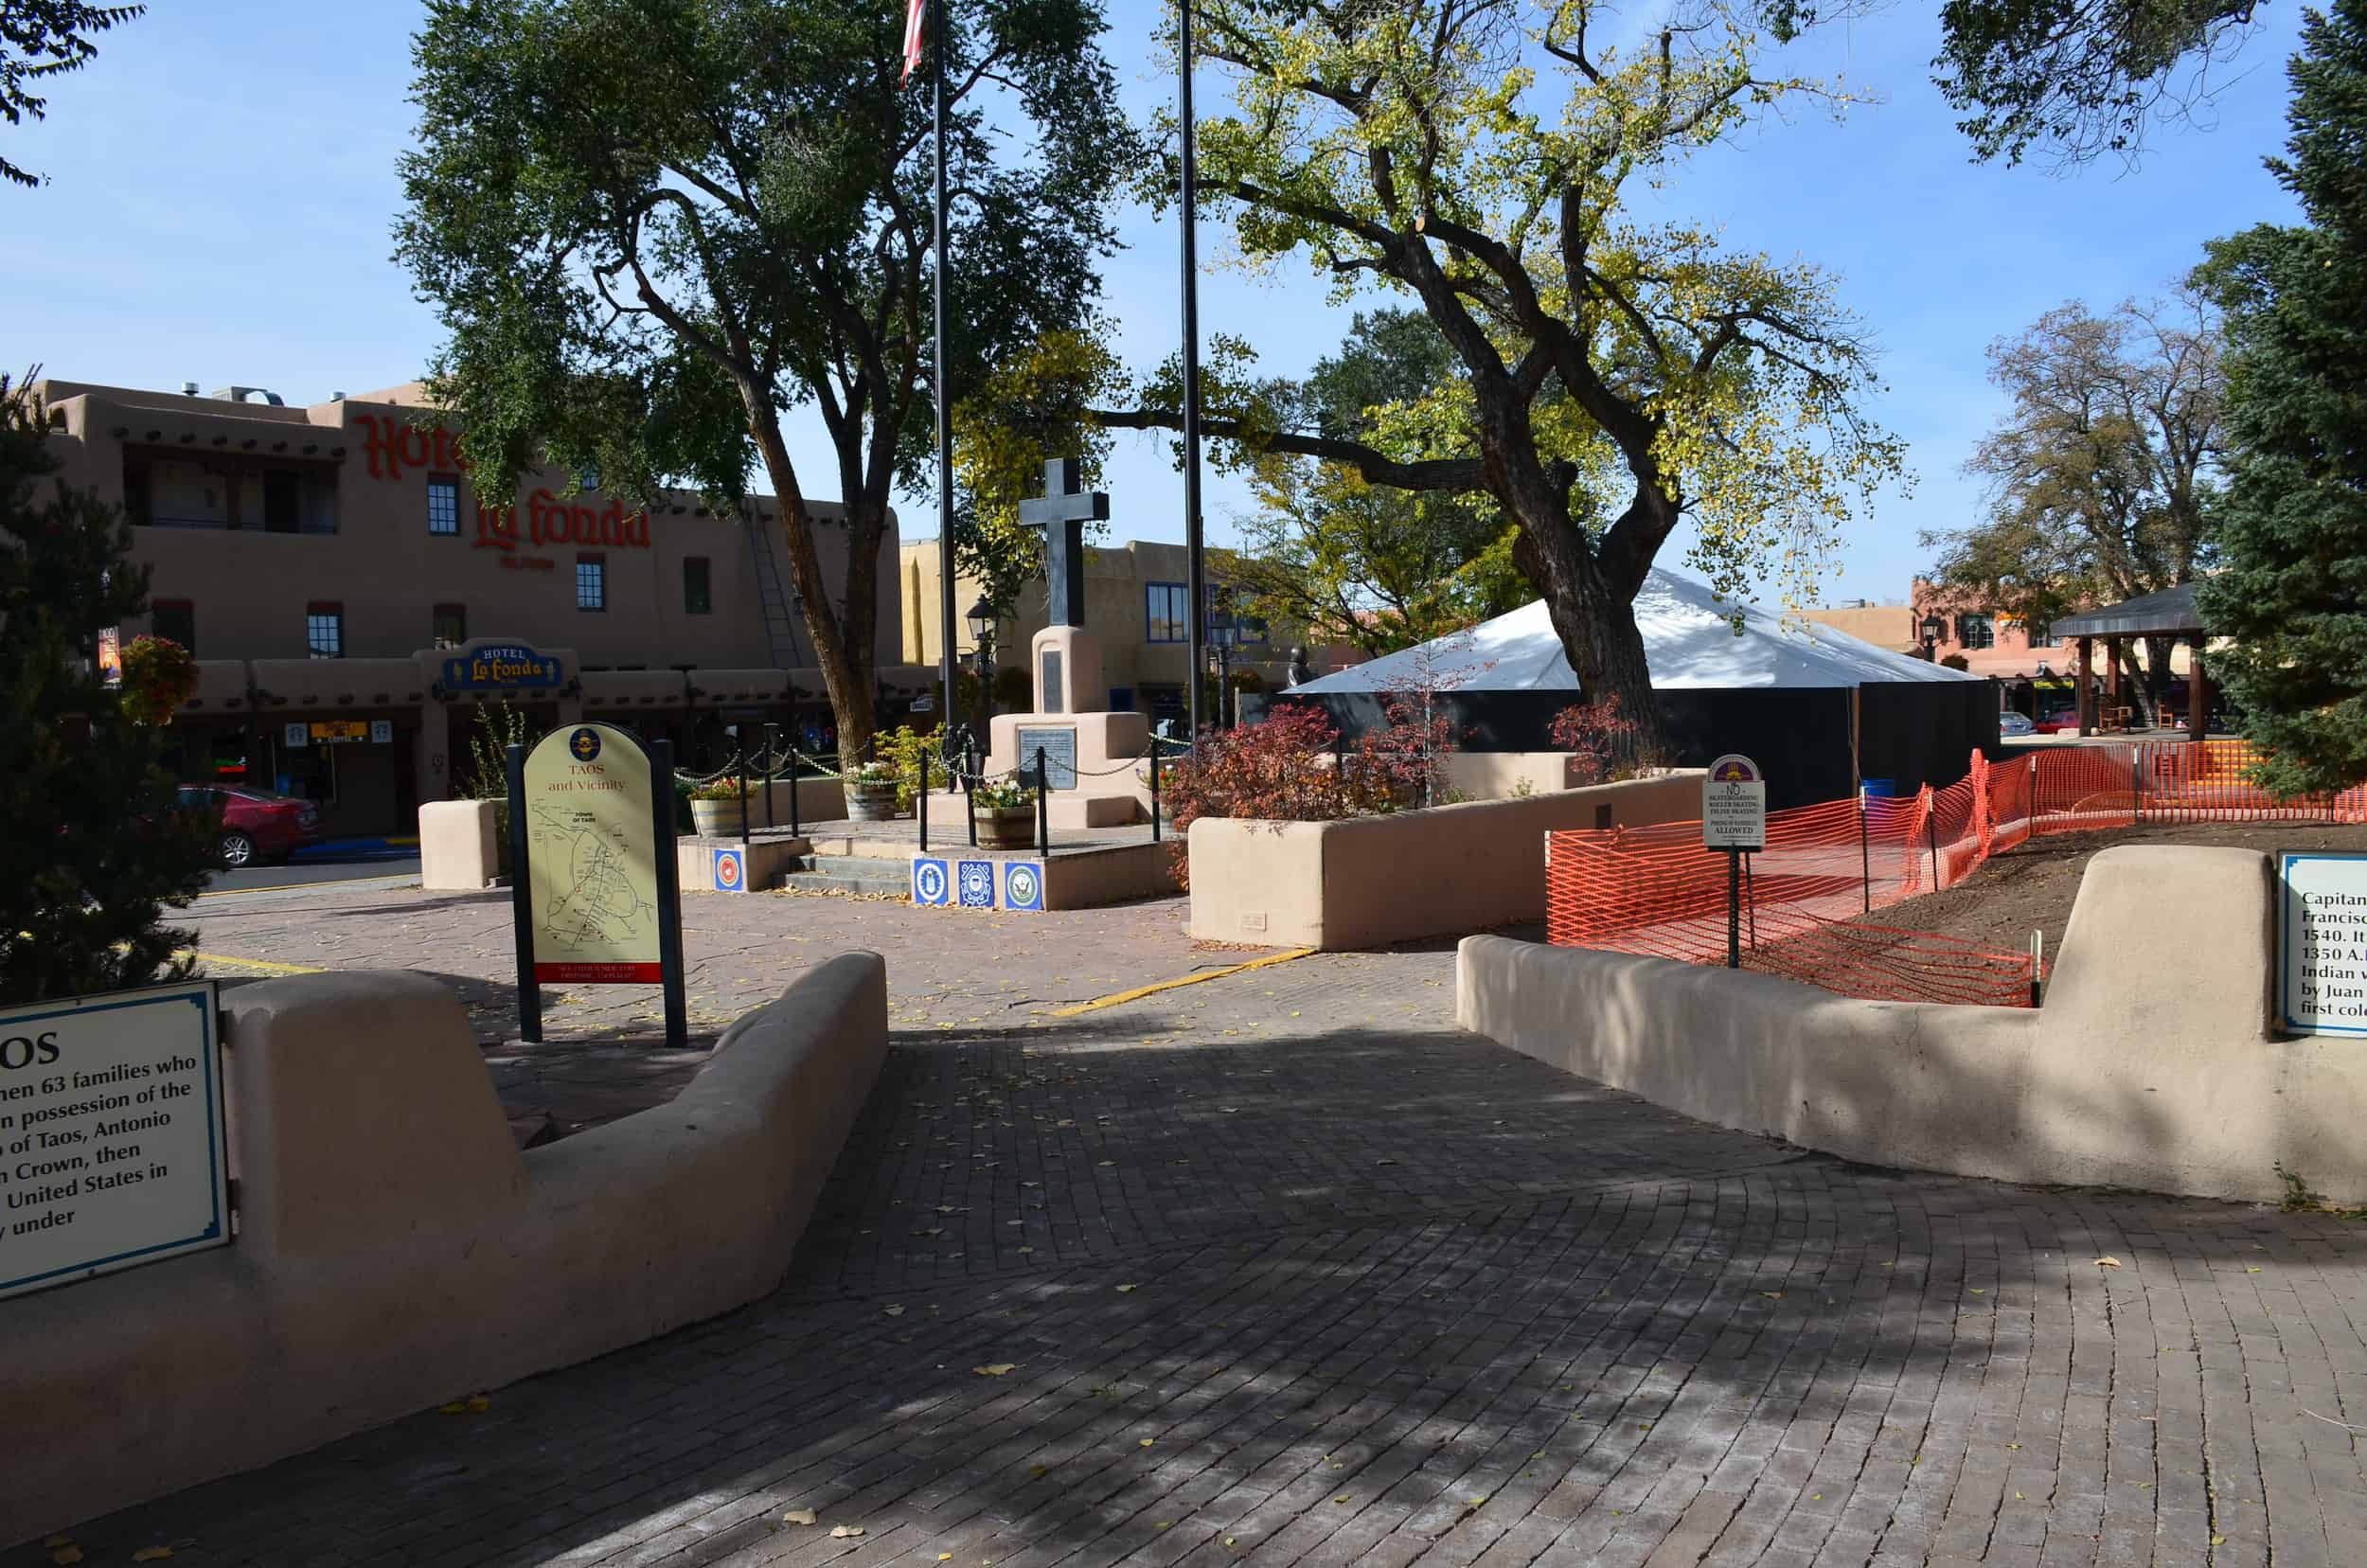 Taos Plaza in the Downtown Taos Historic District of Taos, New Mexico